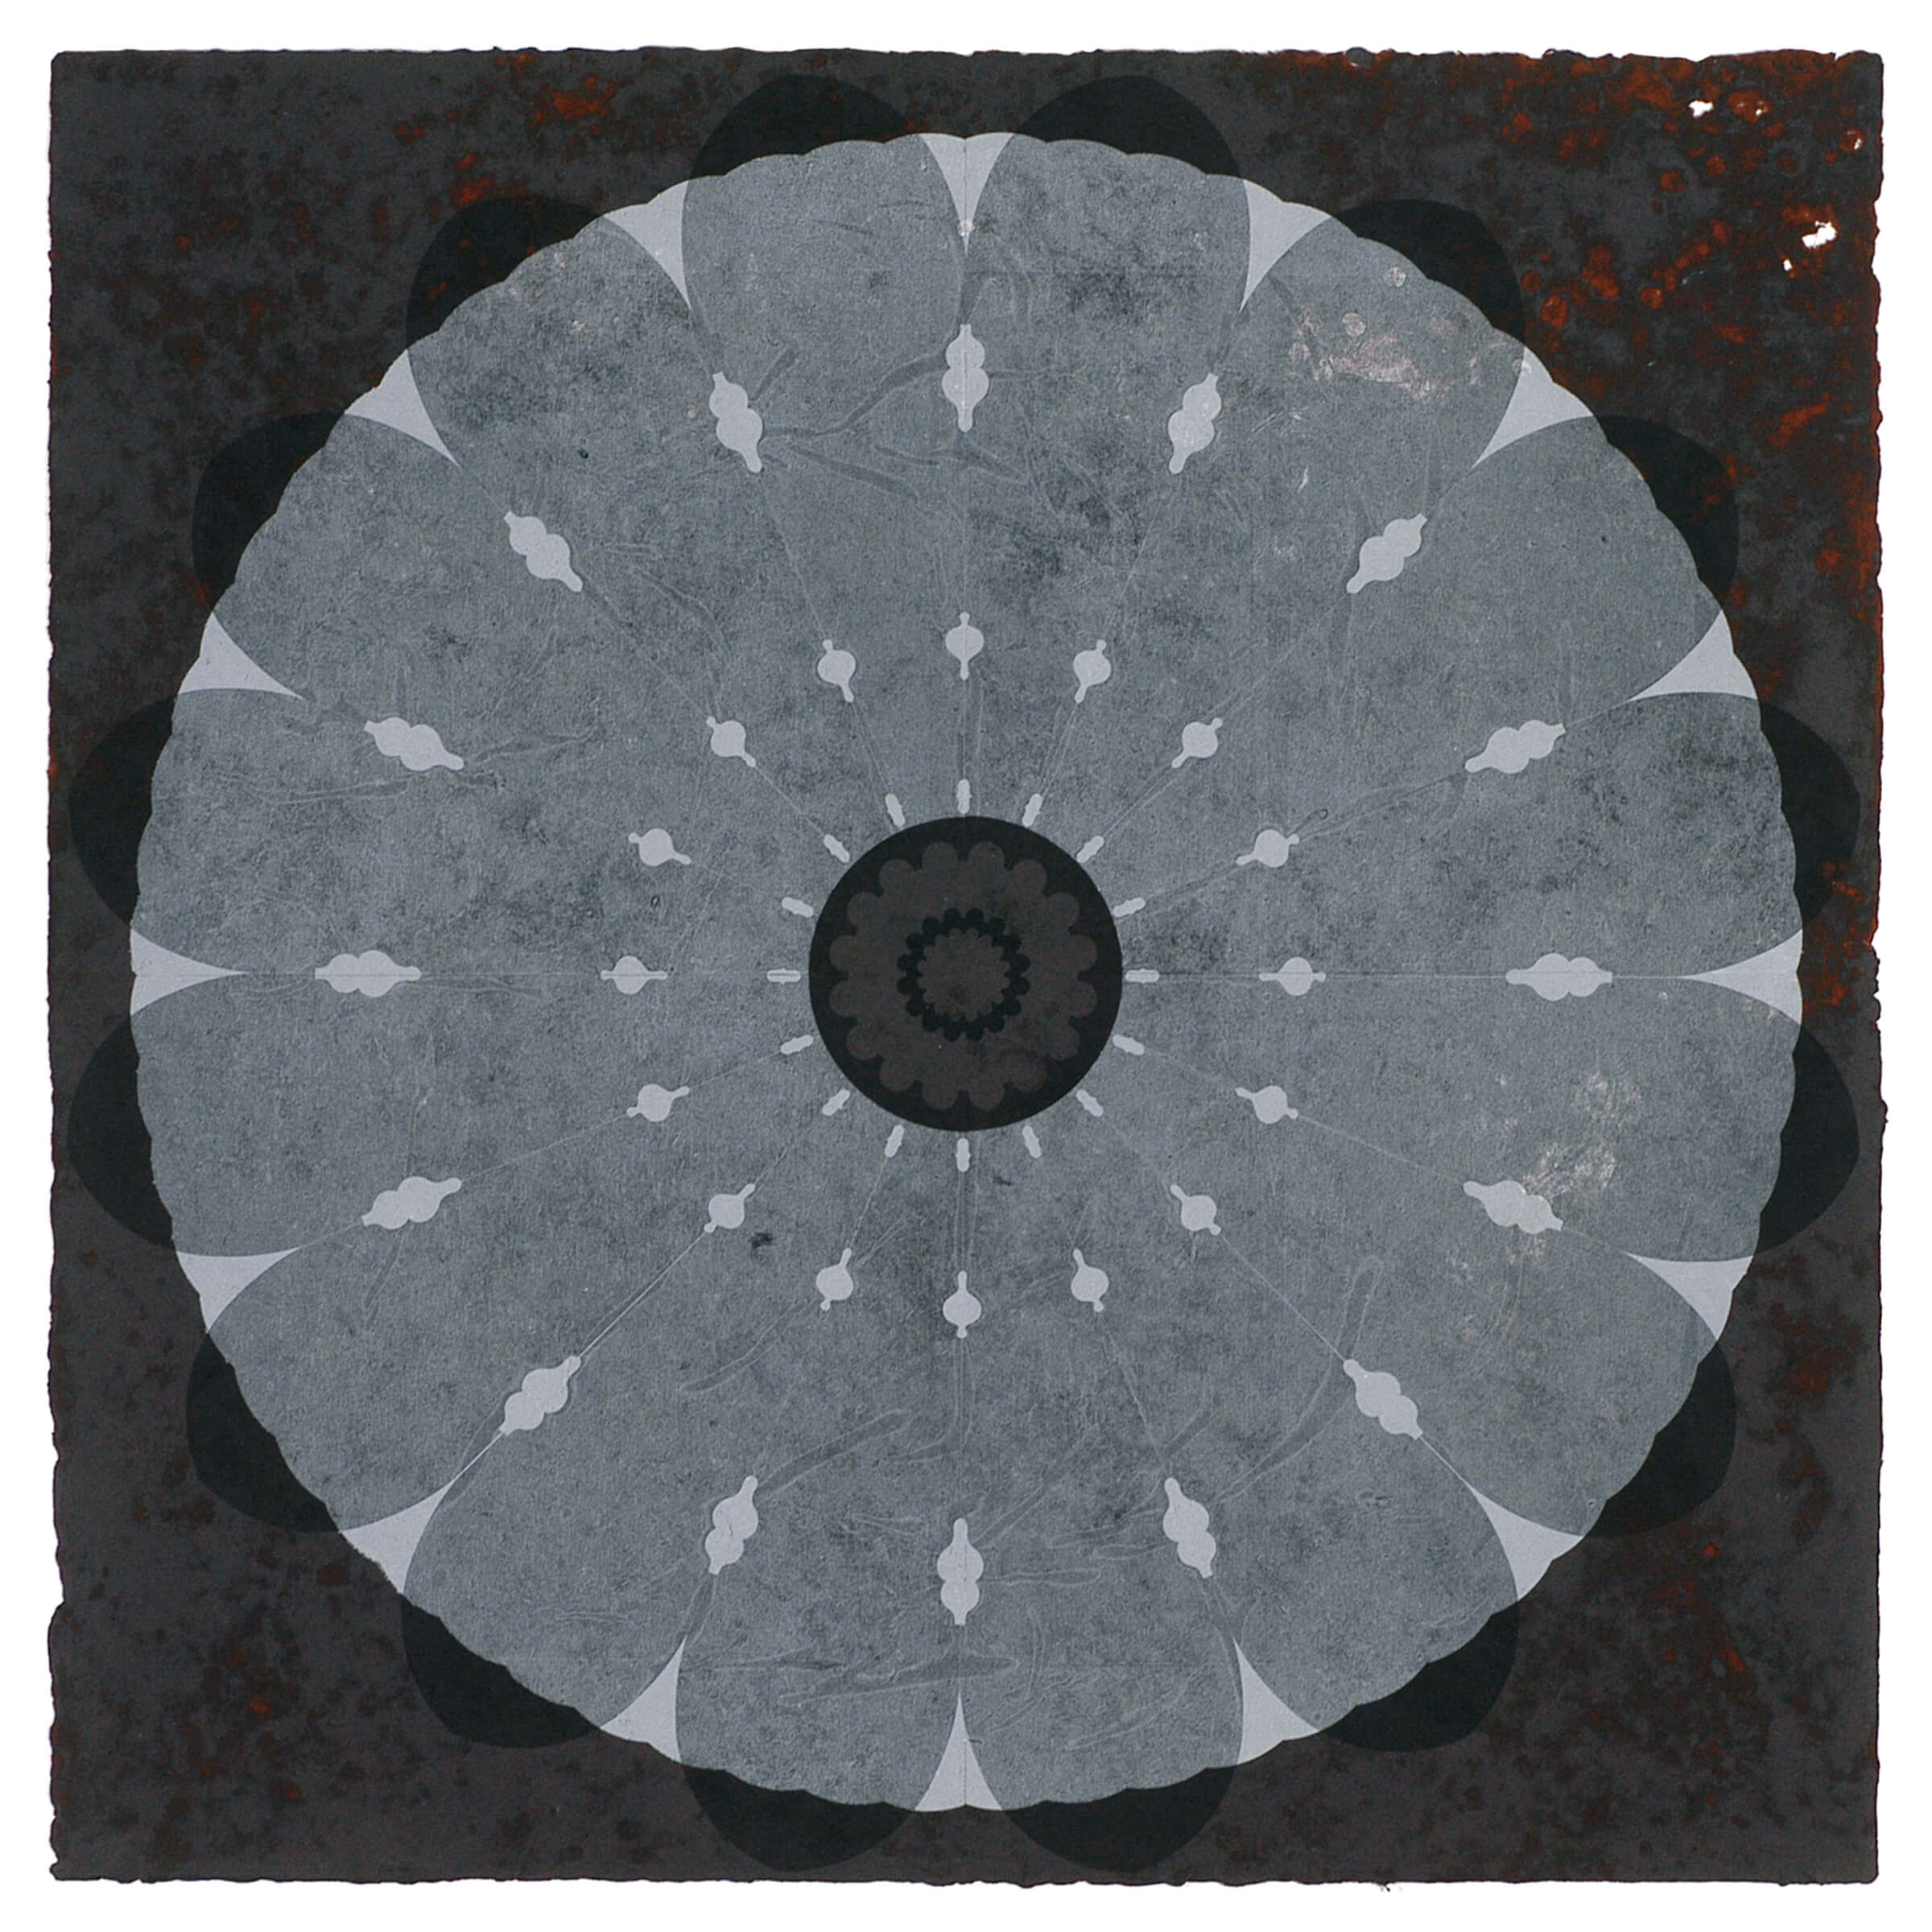 Rose Window Series 64, 2006,  48 x 48 inches, ink on handmade paper, edition variable